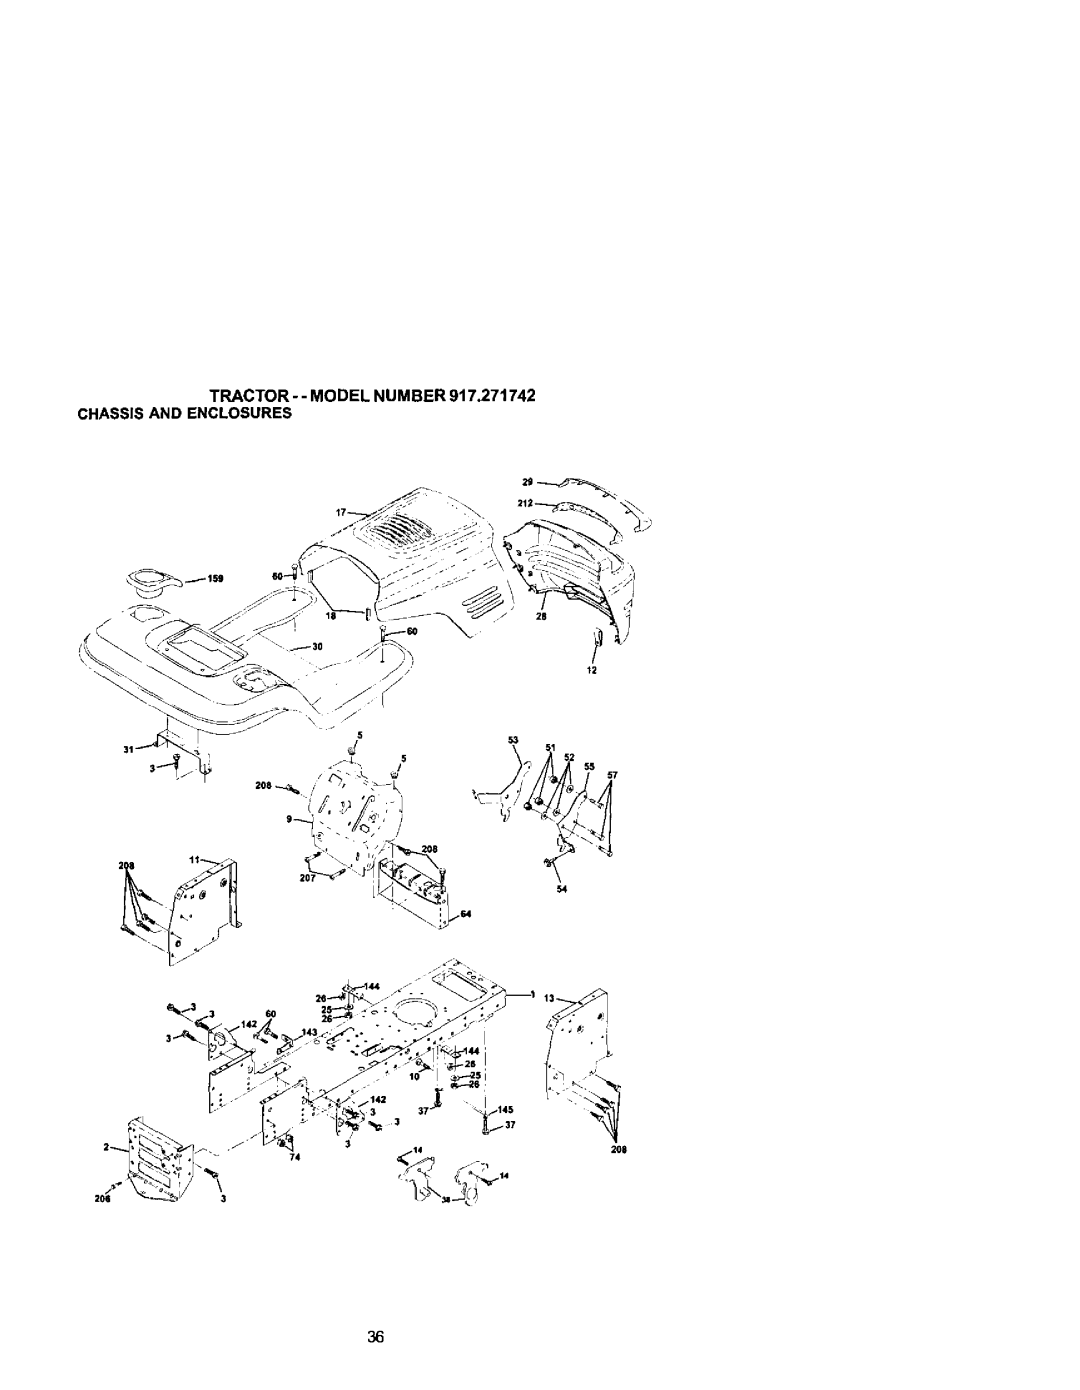 Craftsman 917.271742 owner manual Tractor- - Model Number Chassisand Enclosures 